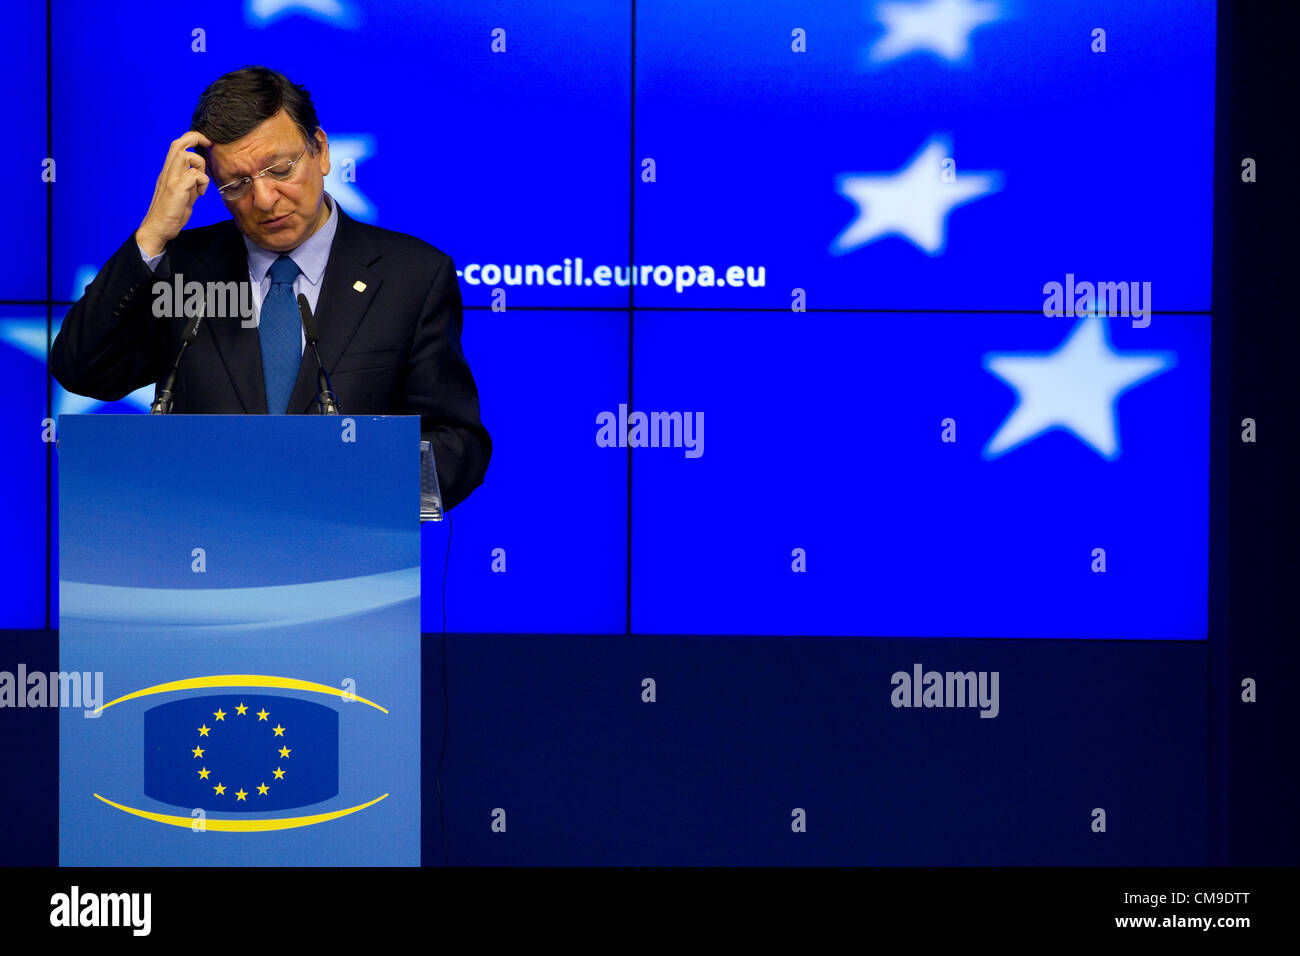 EU Summit, Justus Lipsius Building, Brussels. 28.06.2012 Picture shows José Manuel Barroso, President of the European Commission in the main media hall at Brussels European Parliament, at the EU Summit today. Stock Photo